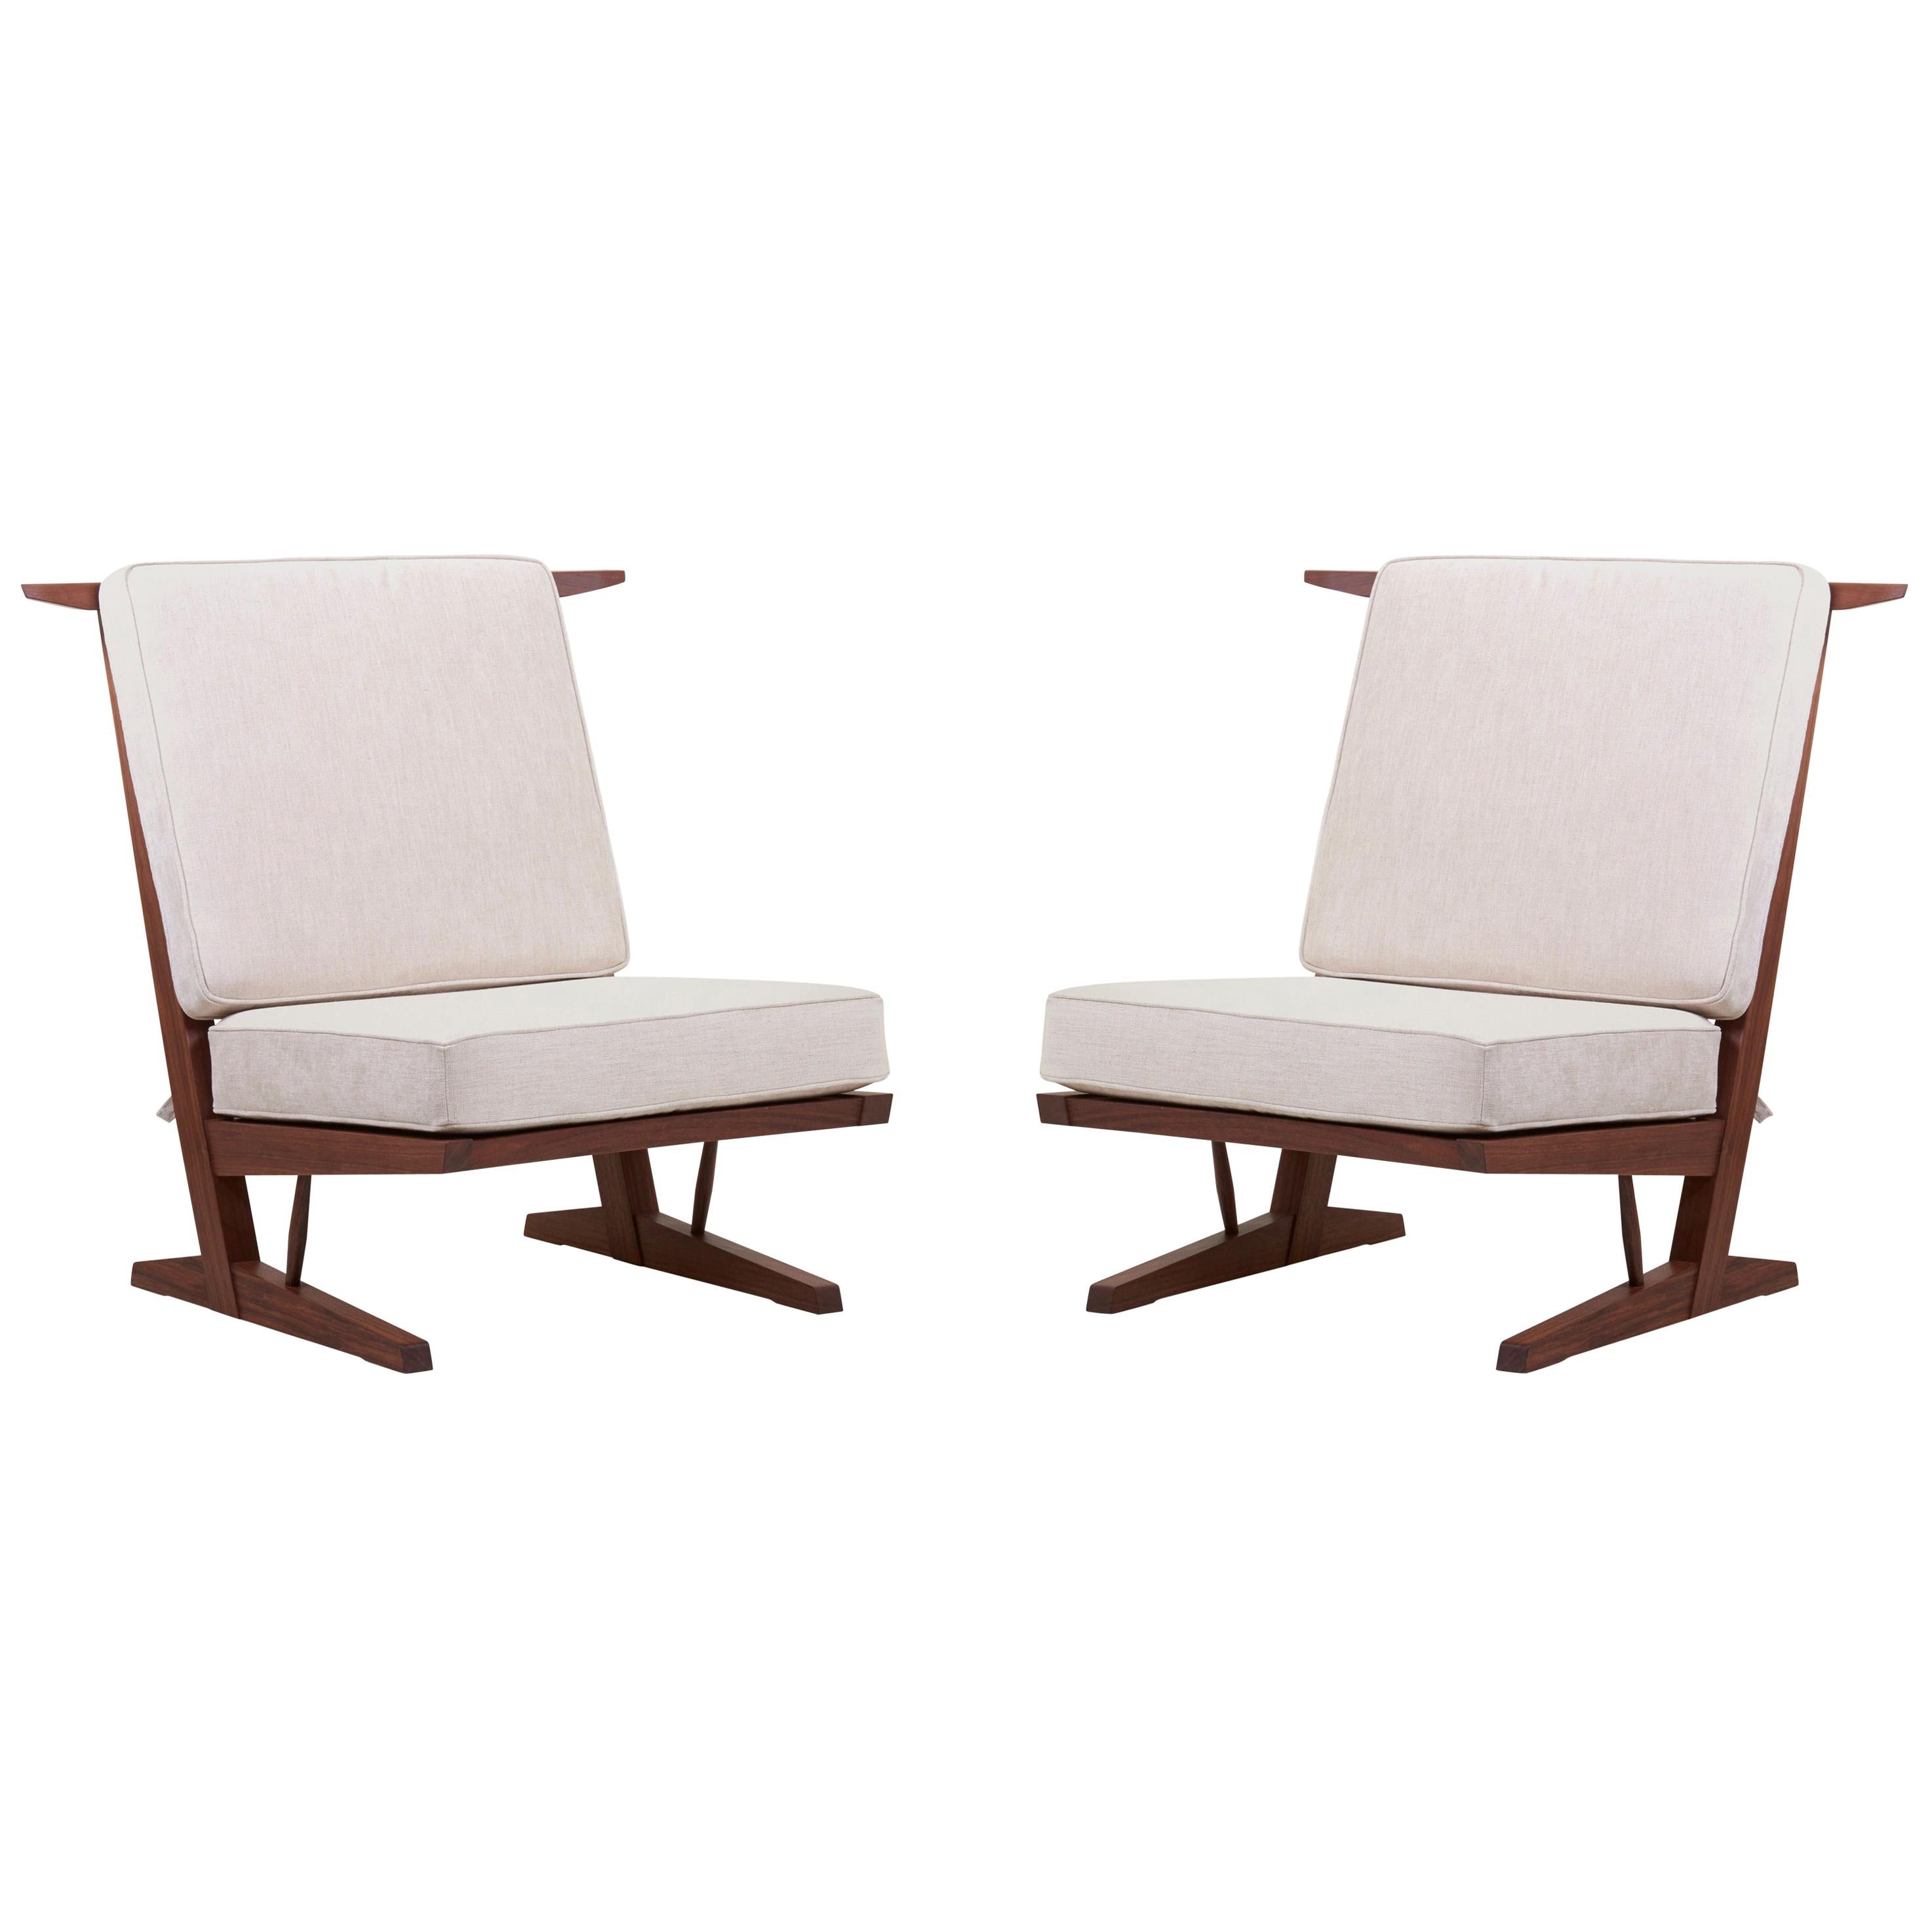 Pair of Conoid Lounge Chairs by George Nakashima